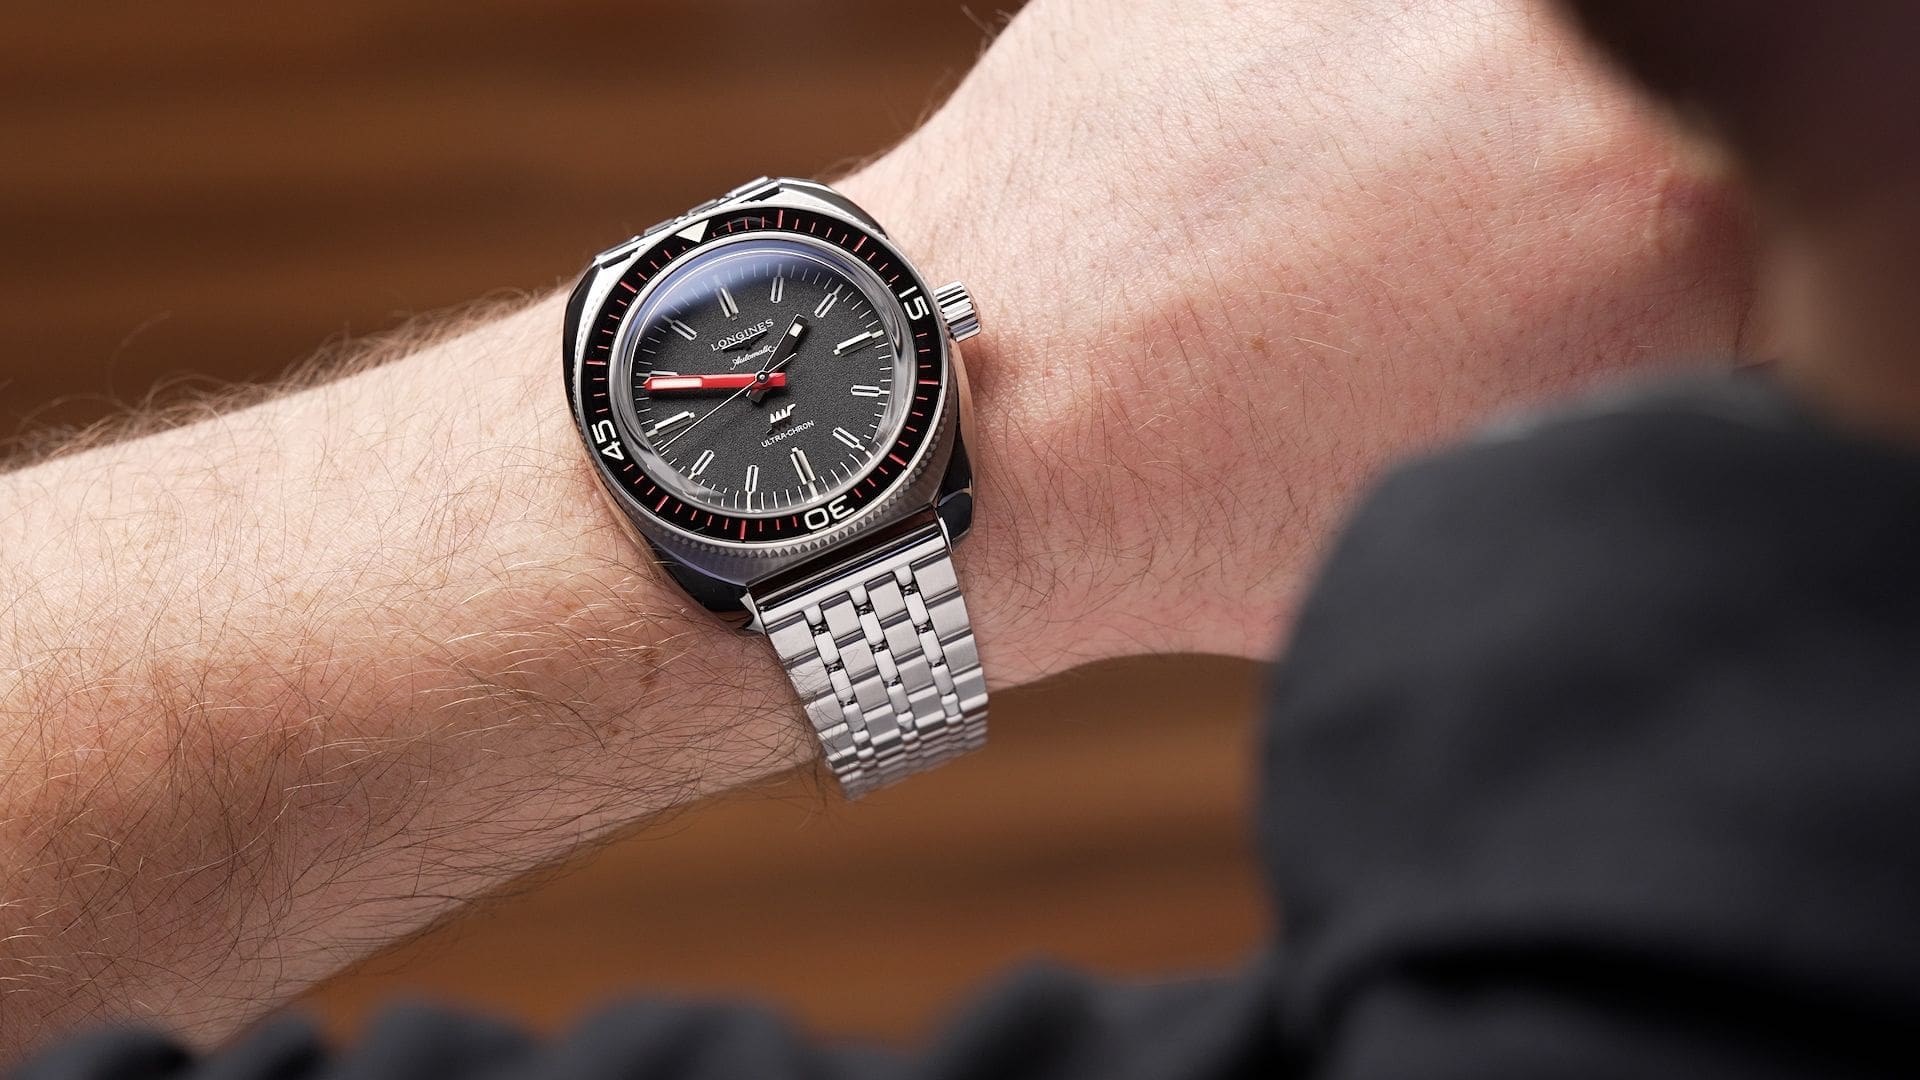 Video: The Longines Ultra-Chron Diver revives the first-ever hi-beat diver